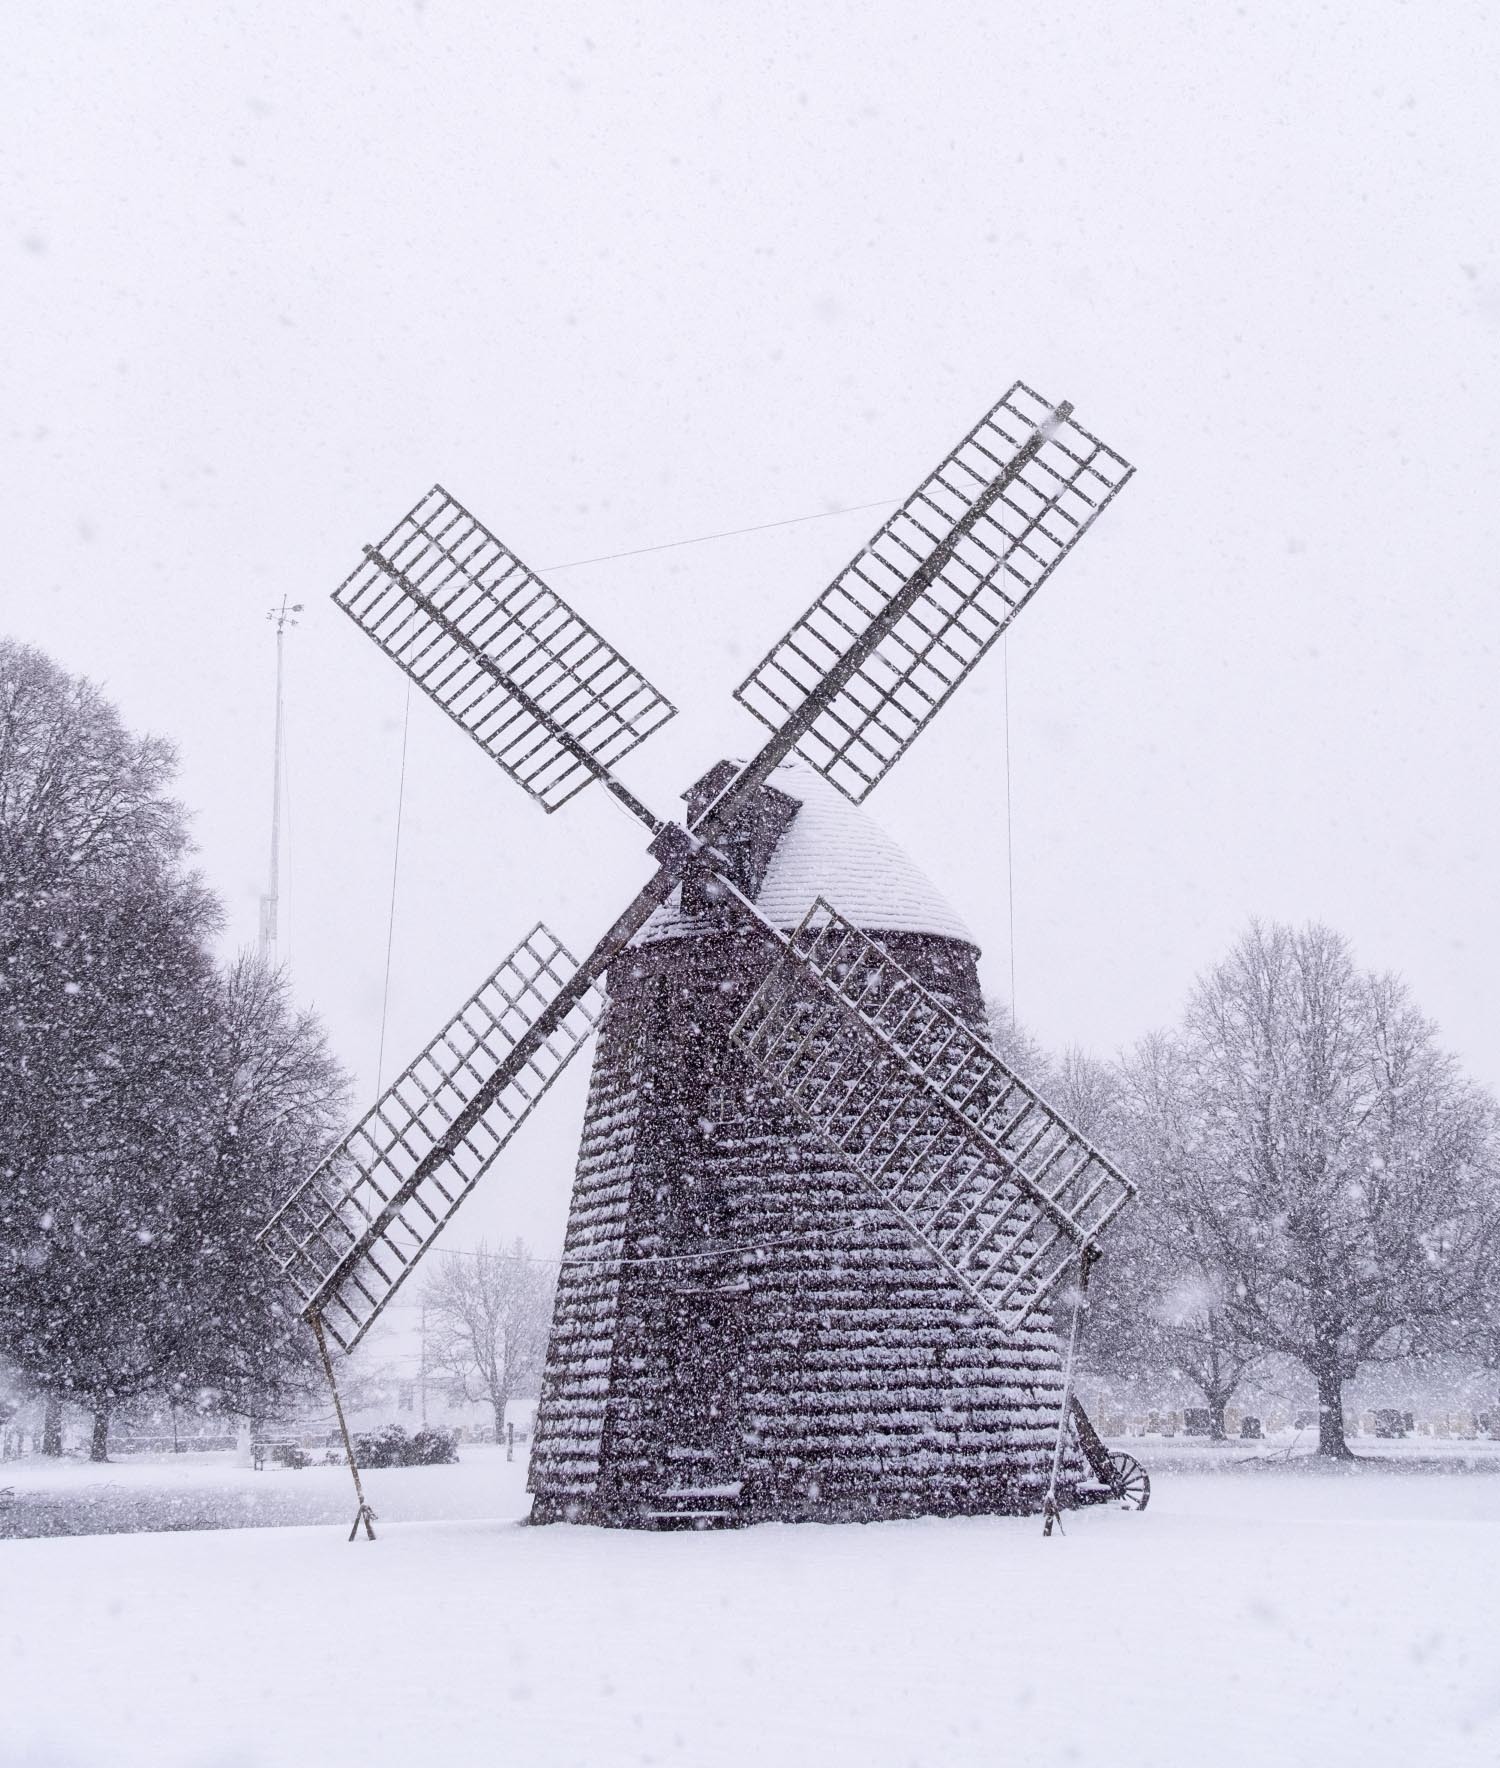 The Corwith Windmill in Water Mill during Tuesday's storm.